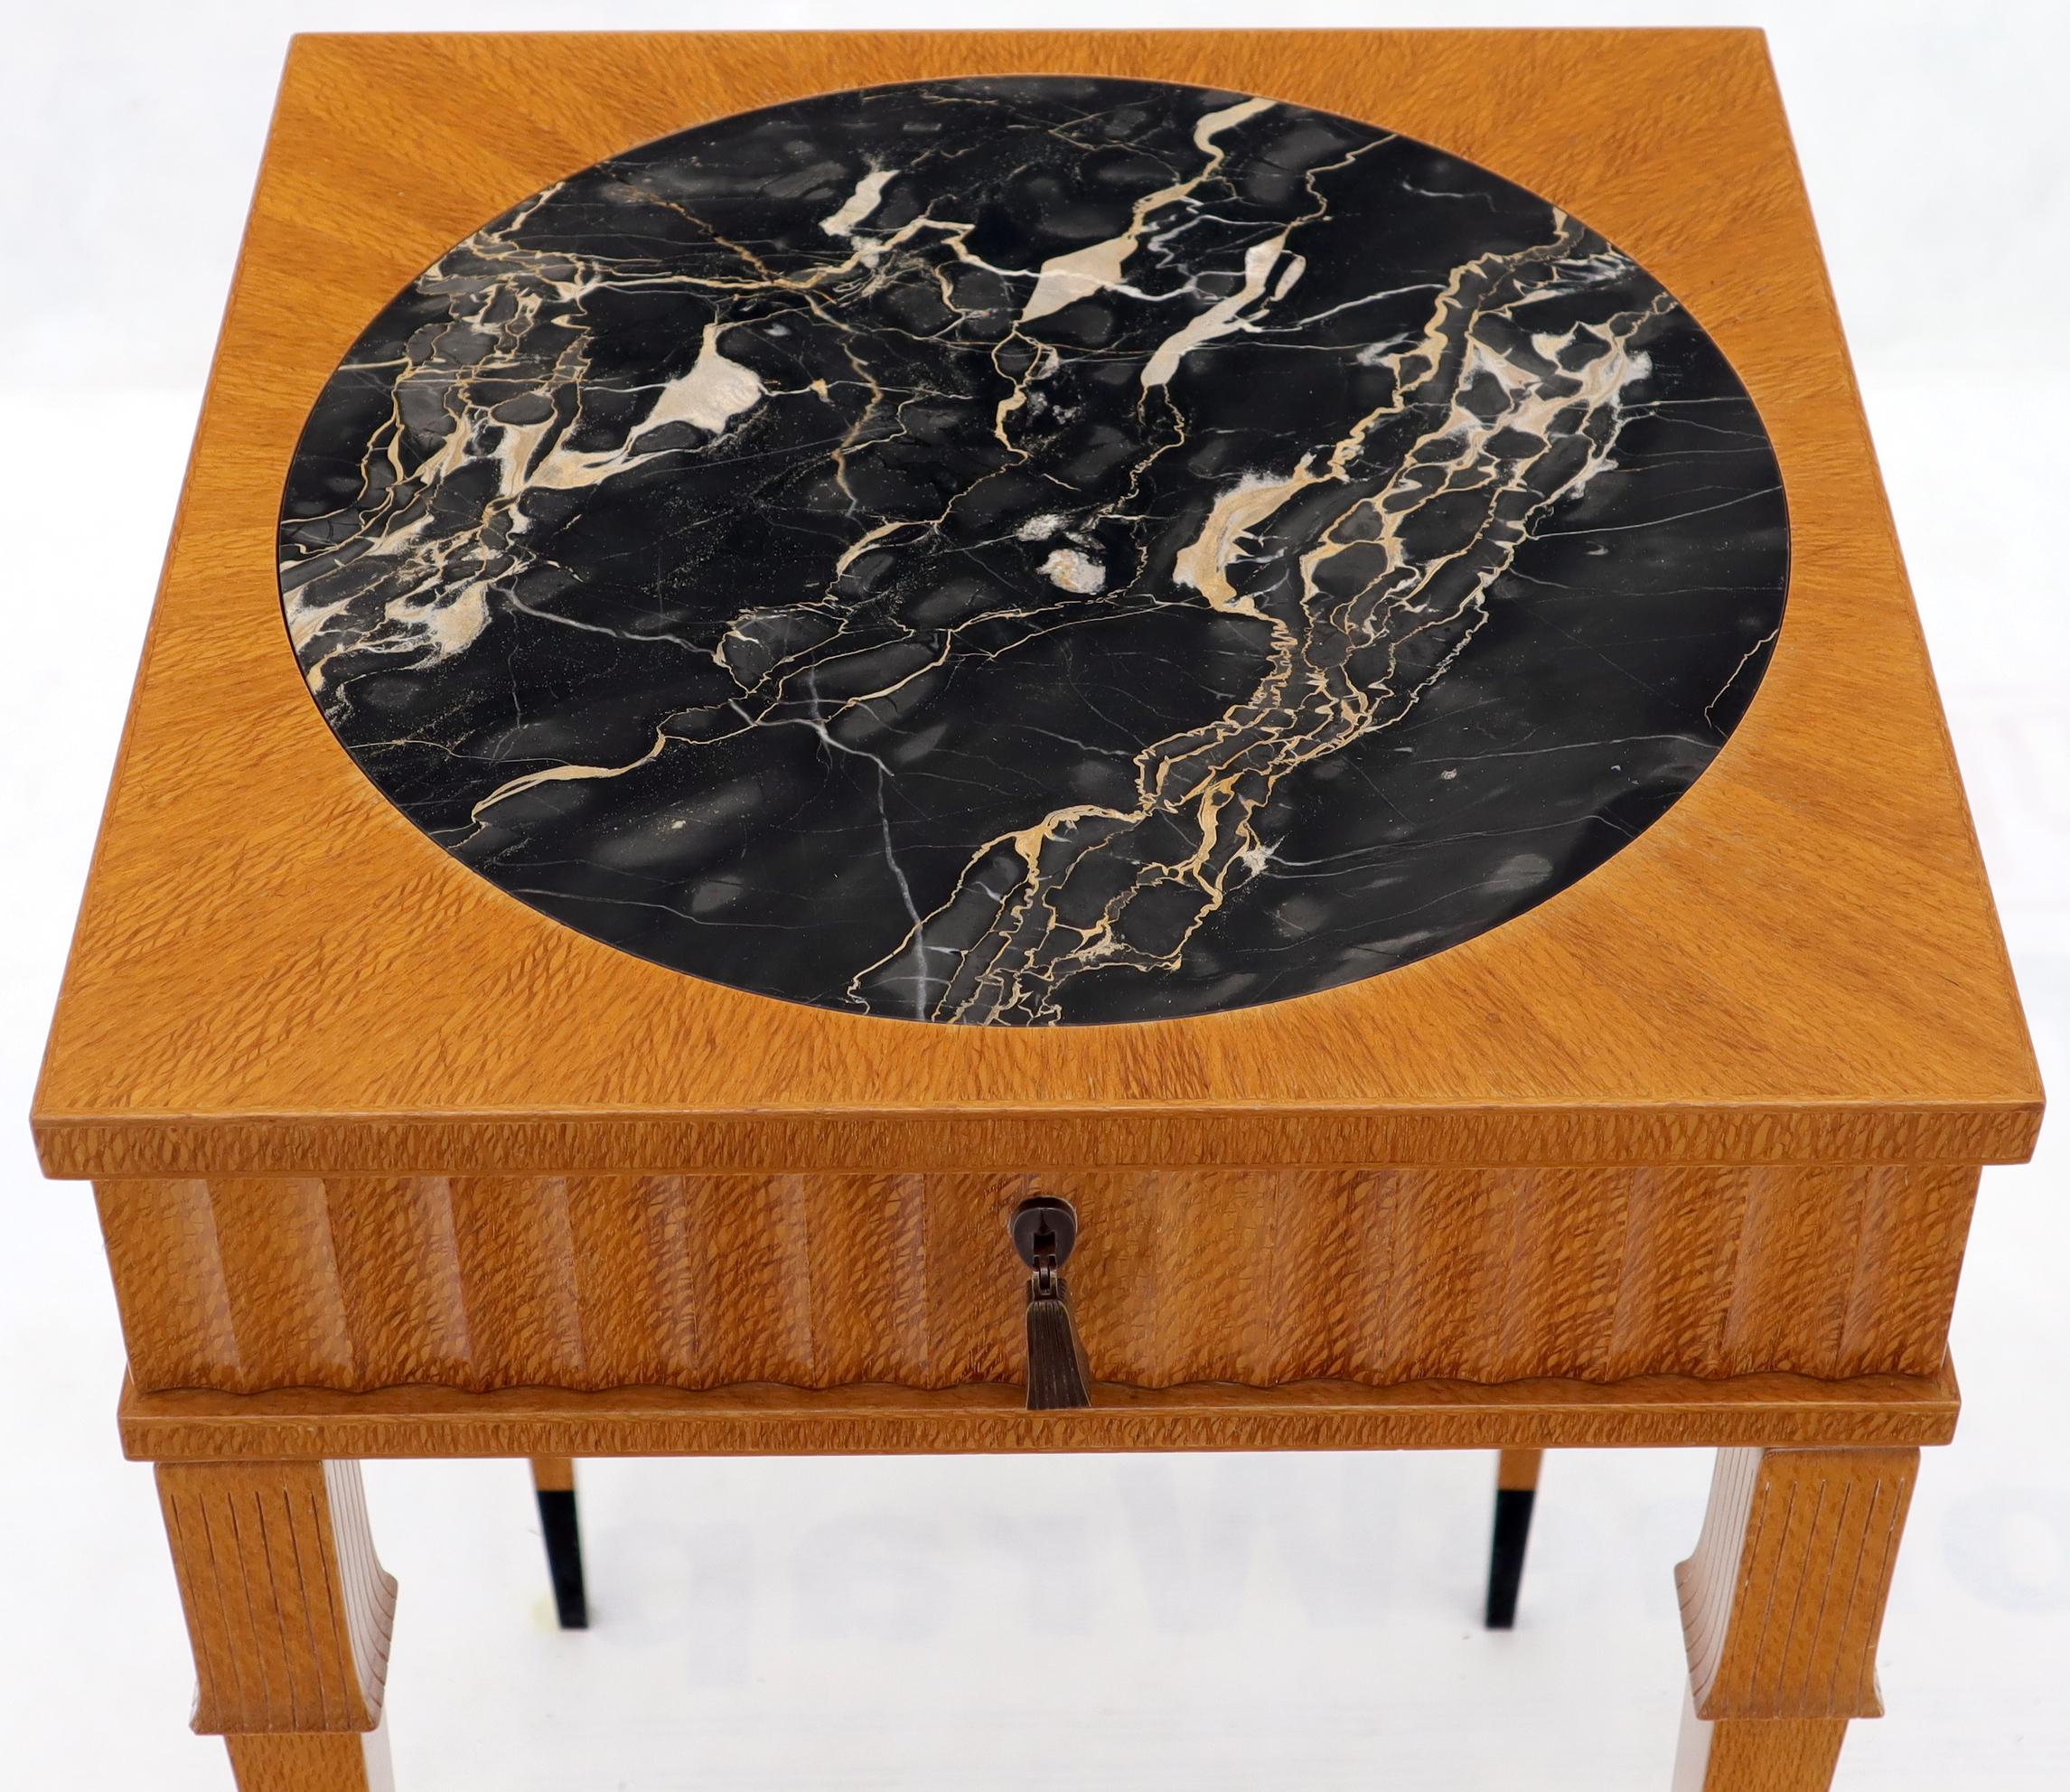 20th Century Square Round Black Marble Insert Top One Drawer Lamp Accent Table Stand For Sale